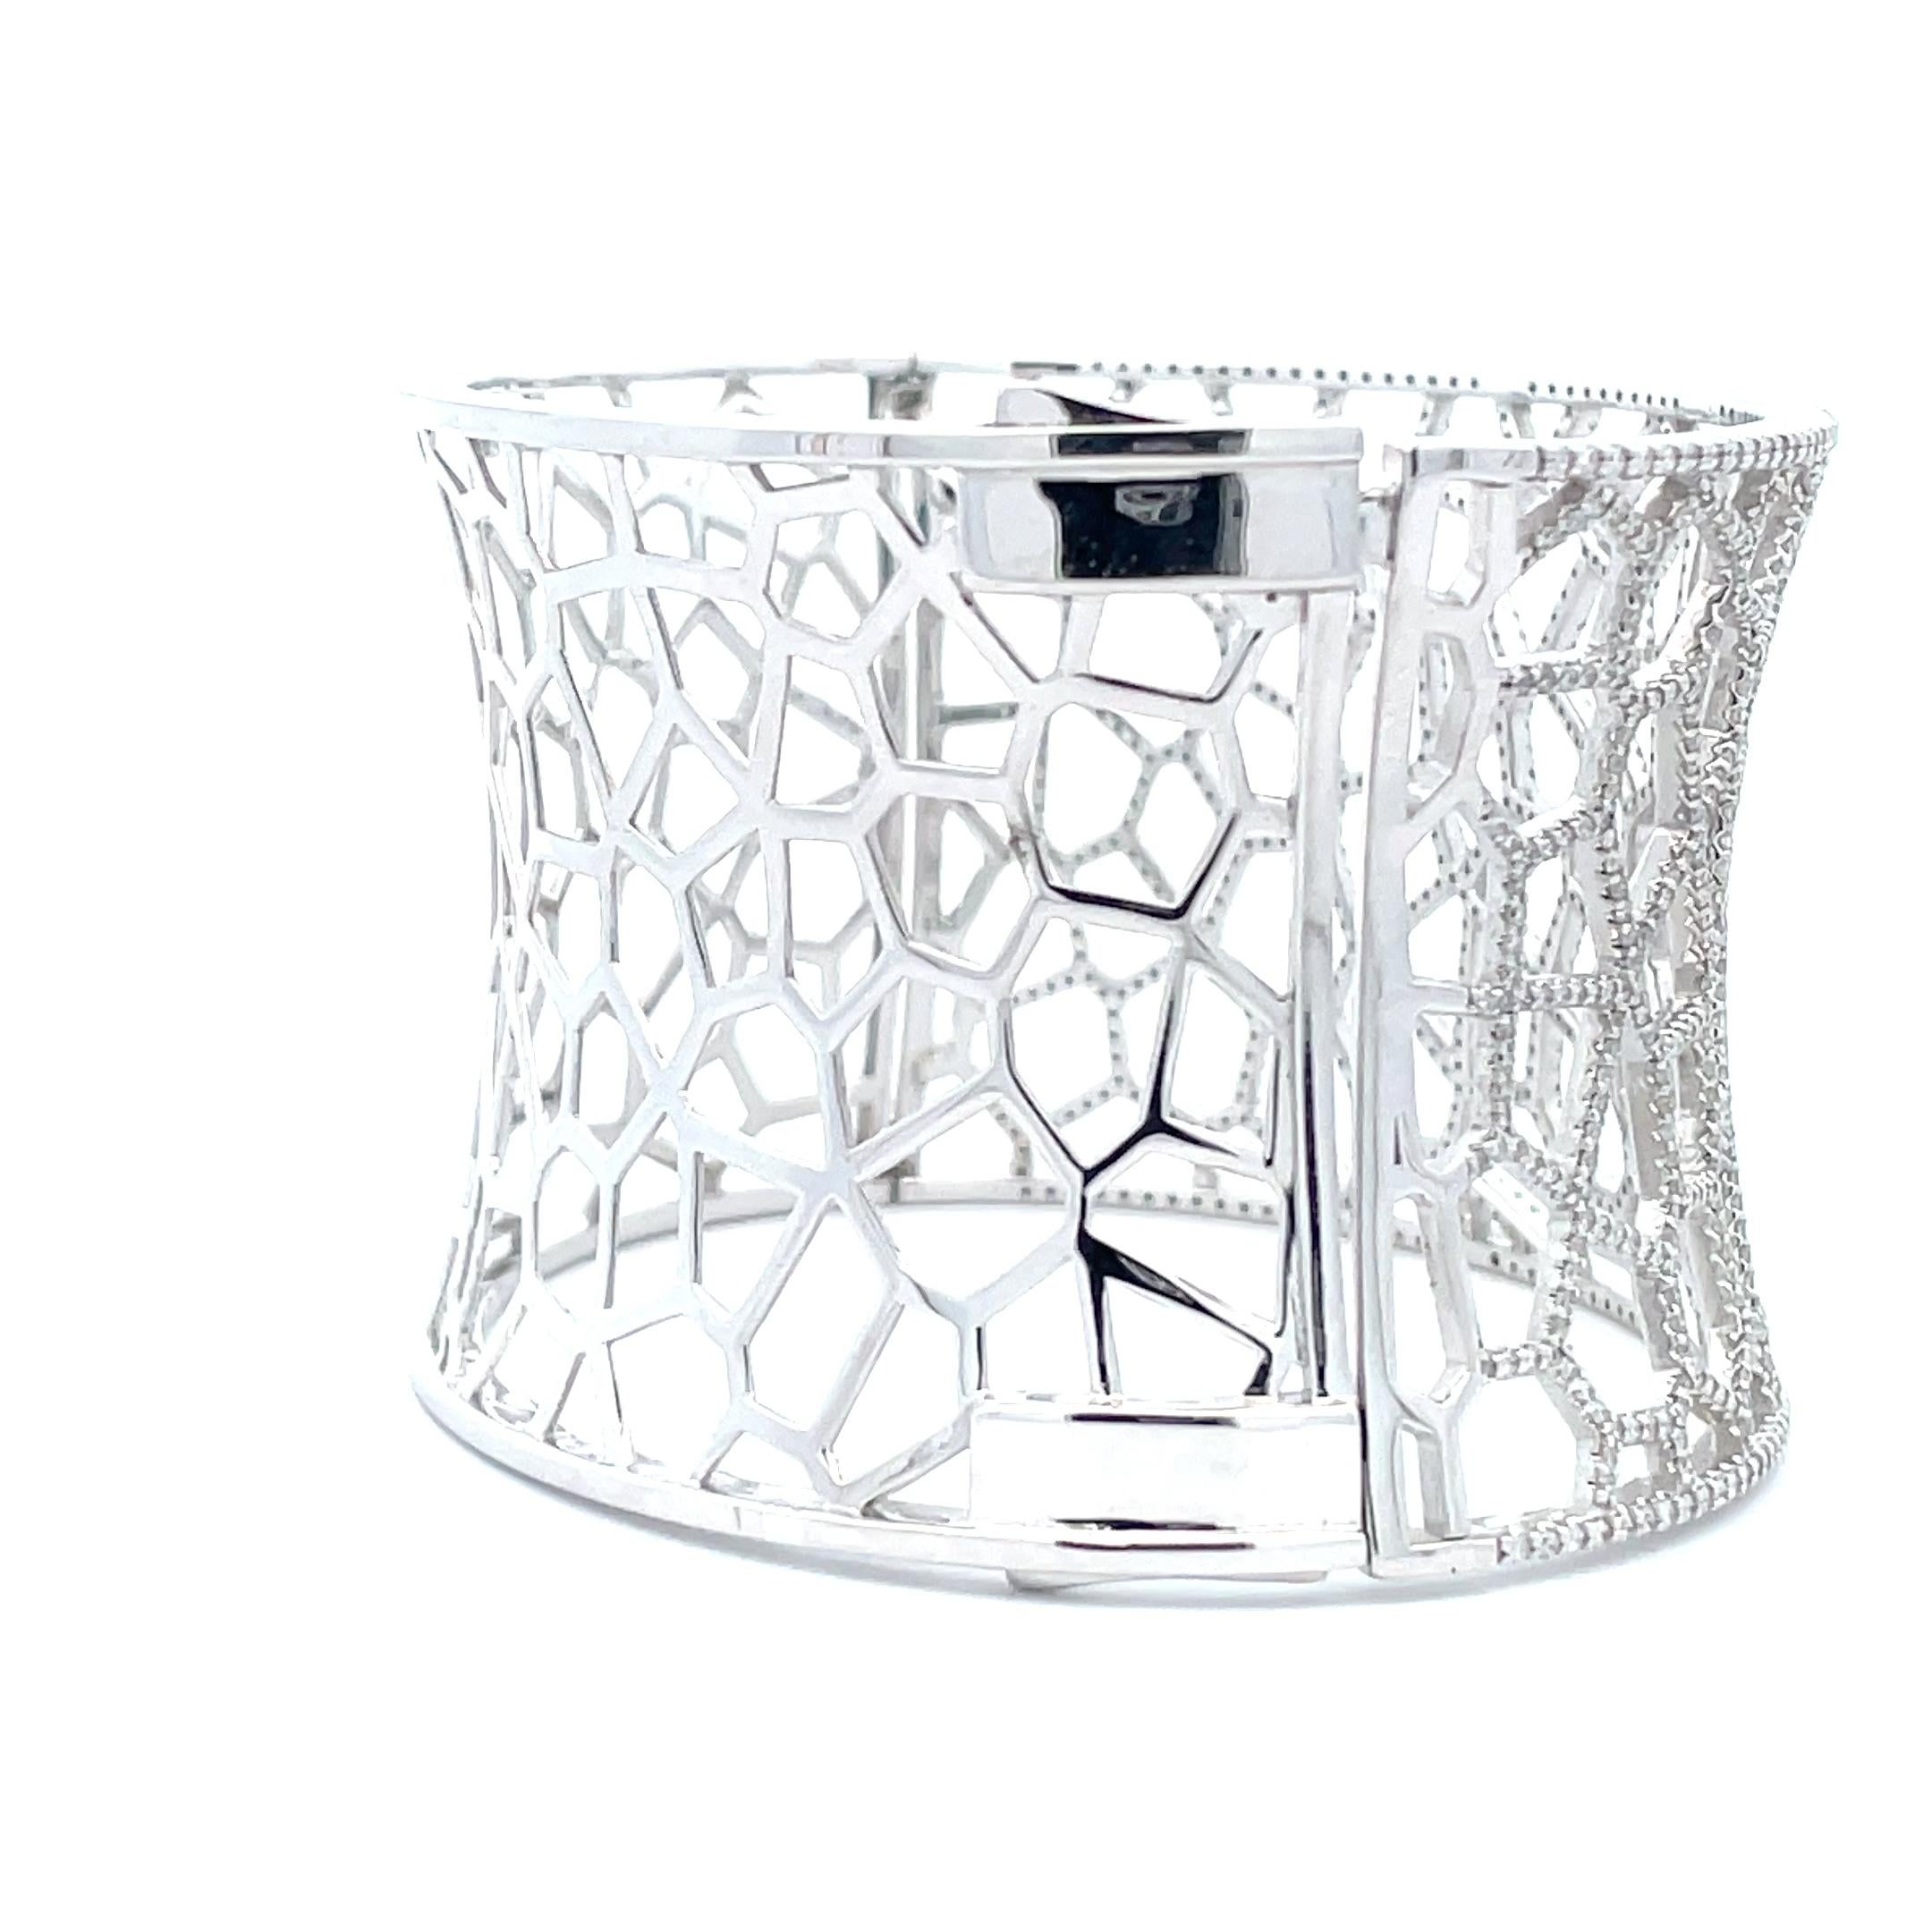 Bringing elegance and refinement to the everyday, this vintage-inspired bangle is handcrafted by a professional artisan with 14K White Gold. A brilliant 3.06 ct. diamond is set into a classic diamond web design, delivering captivating sparkle with